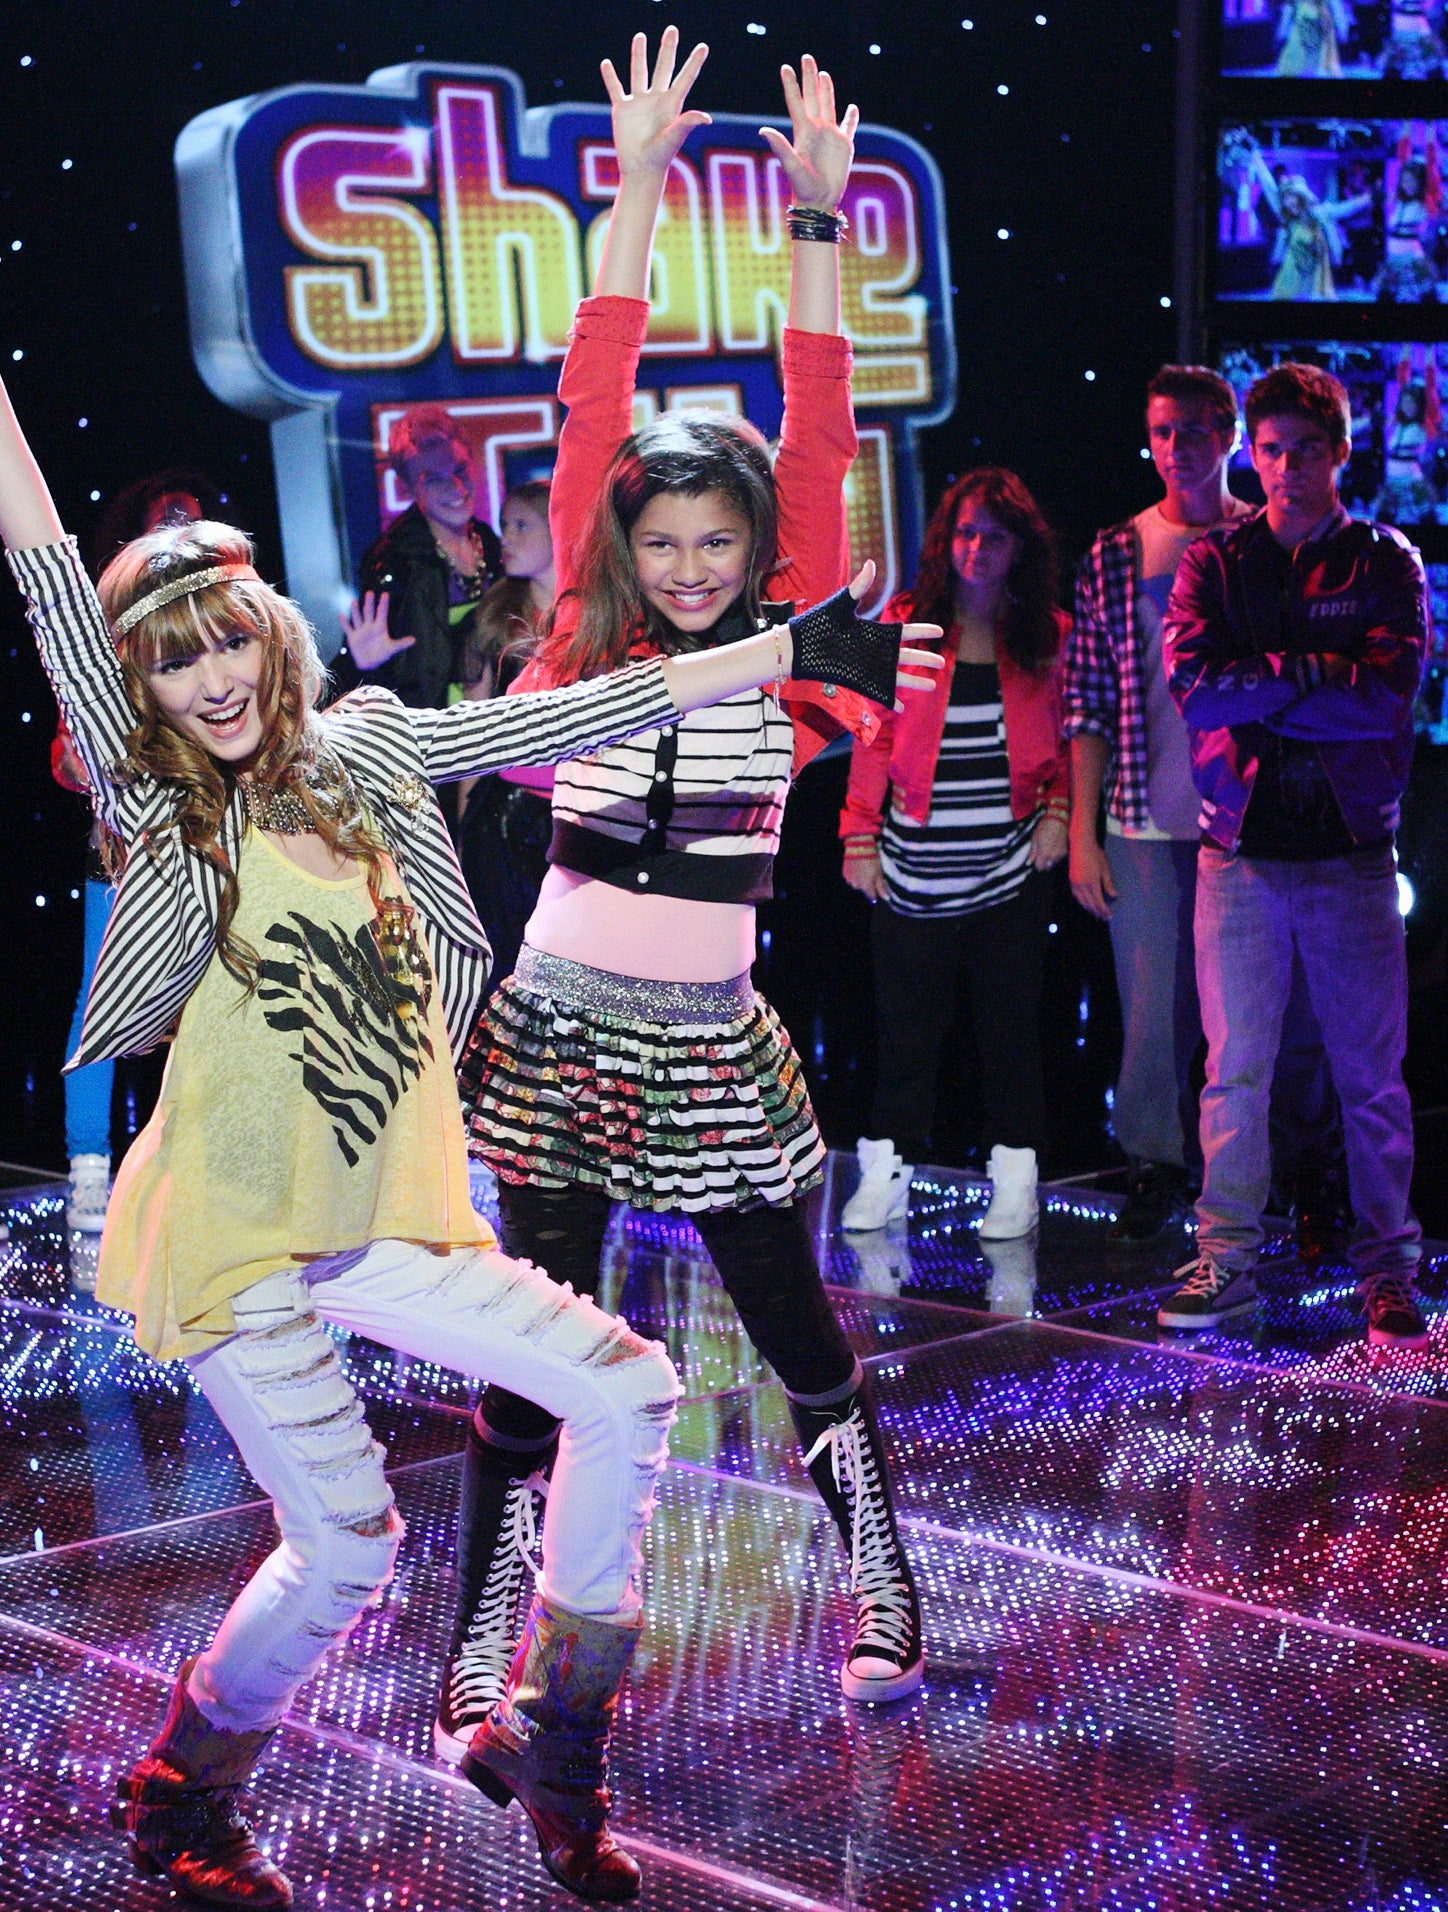 CeCe and Rocky from the TV show &quot;Shake It Up&quot; are dancing on stage with extras in the background